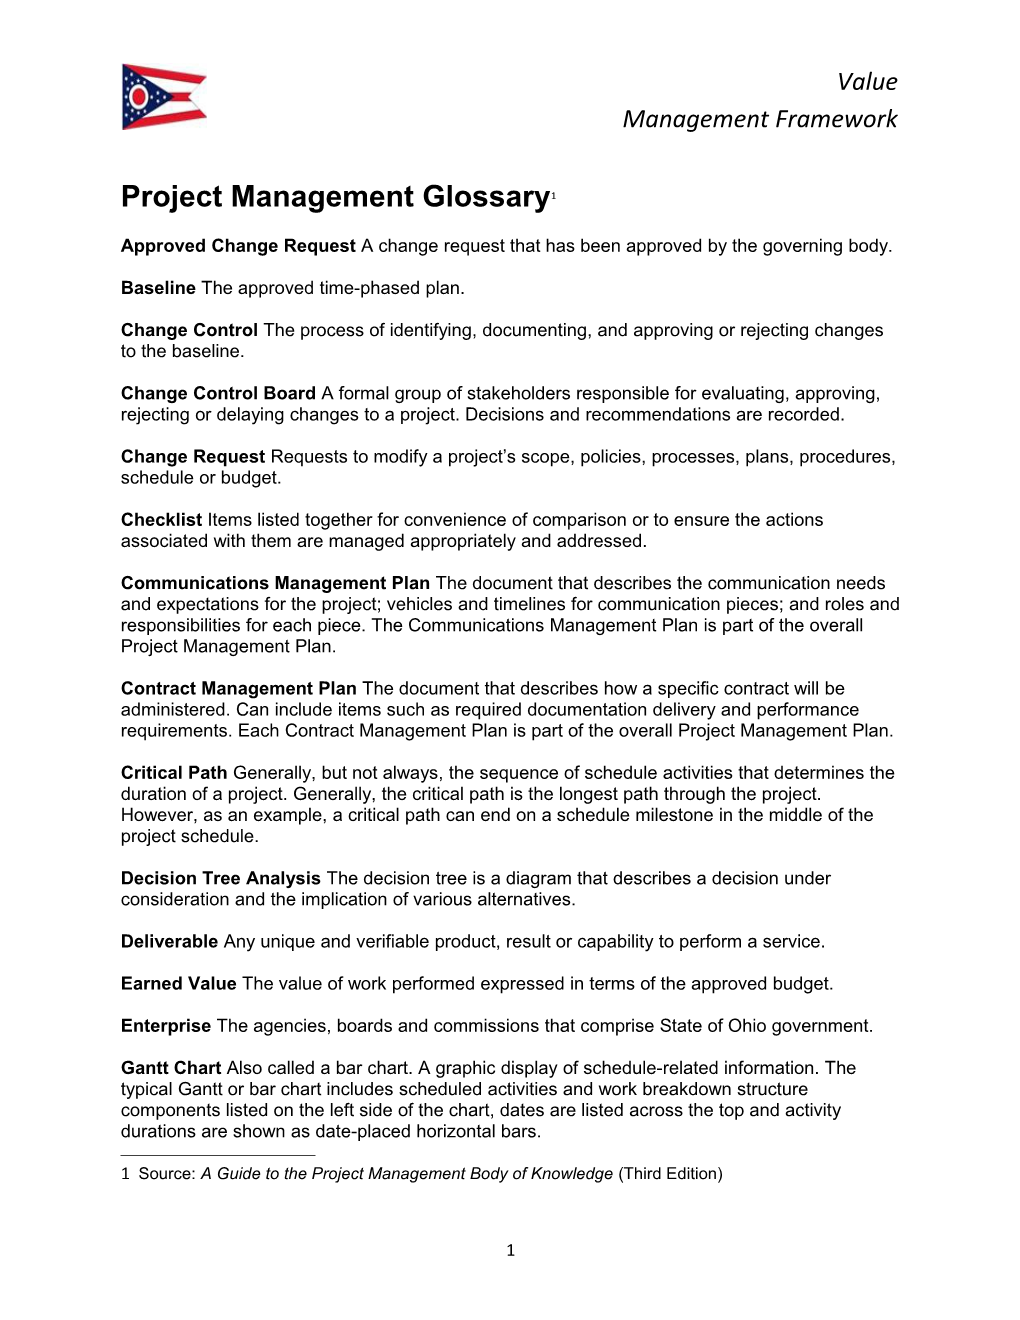 Project Management Glossary 1 s1